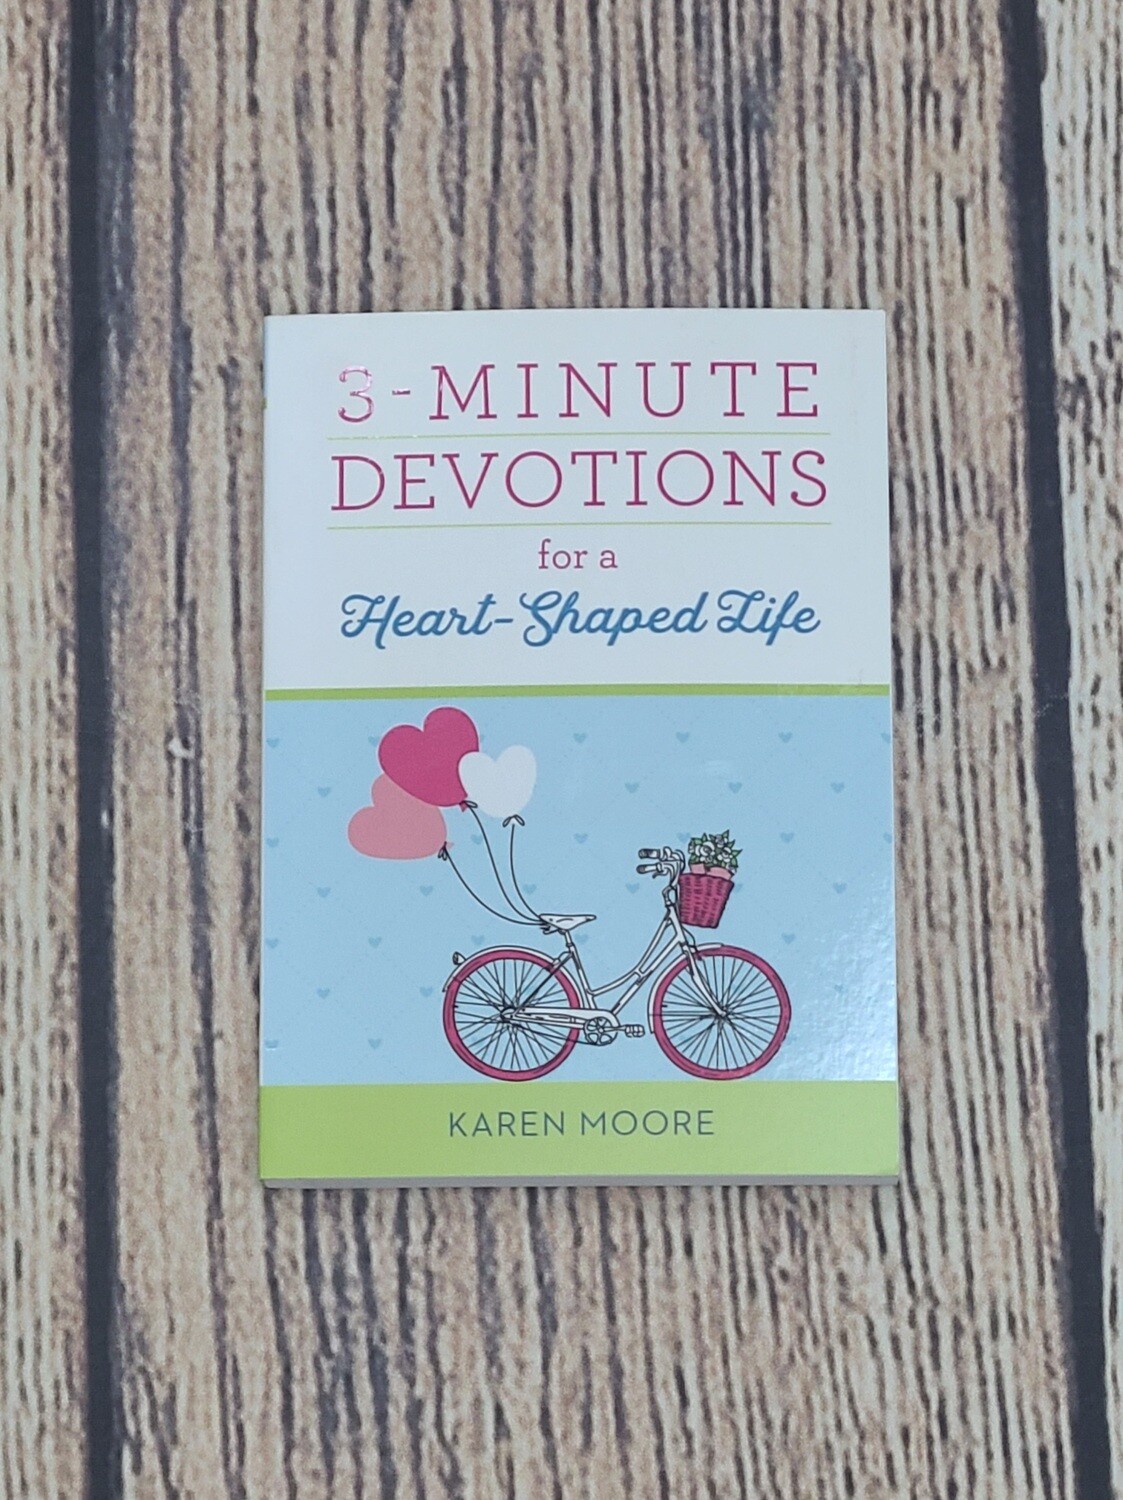 3-Minute Devotions for a Heart-Shaped Life by Karen Moore